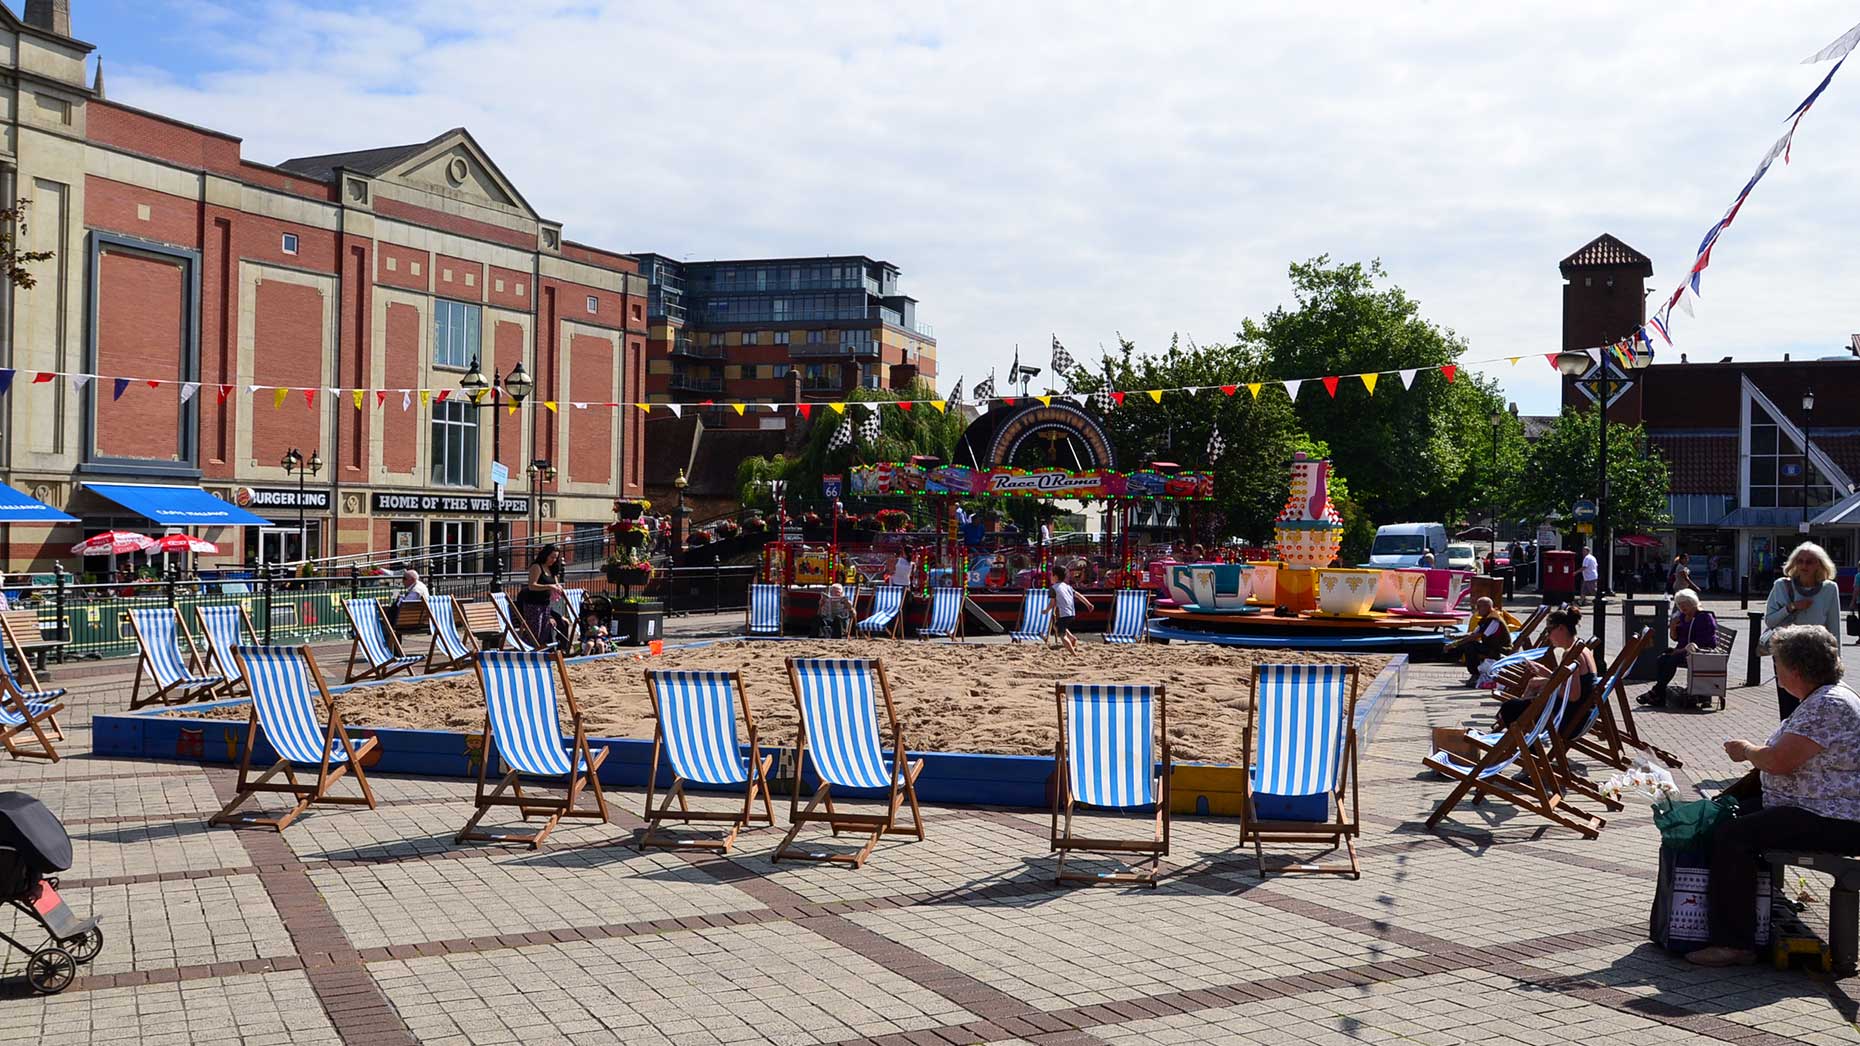 The beach is located on City Square. Photo: Steve Smailes for The Lincolnite